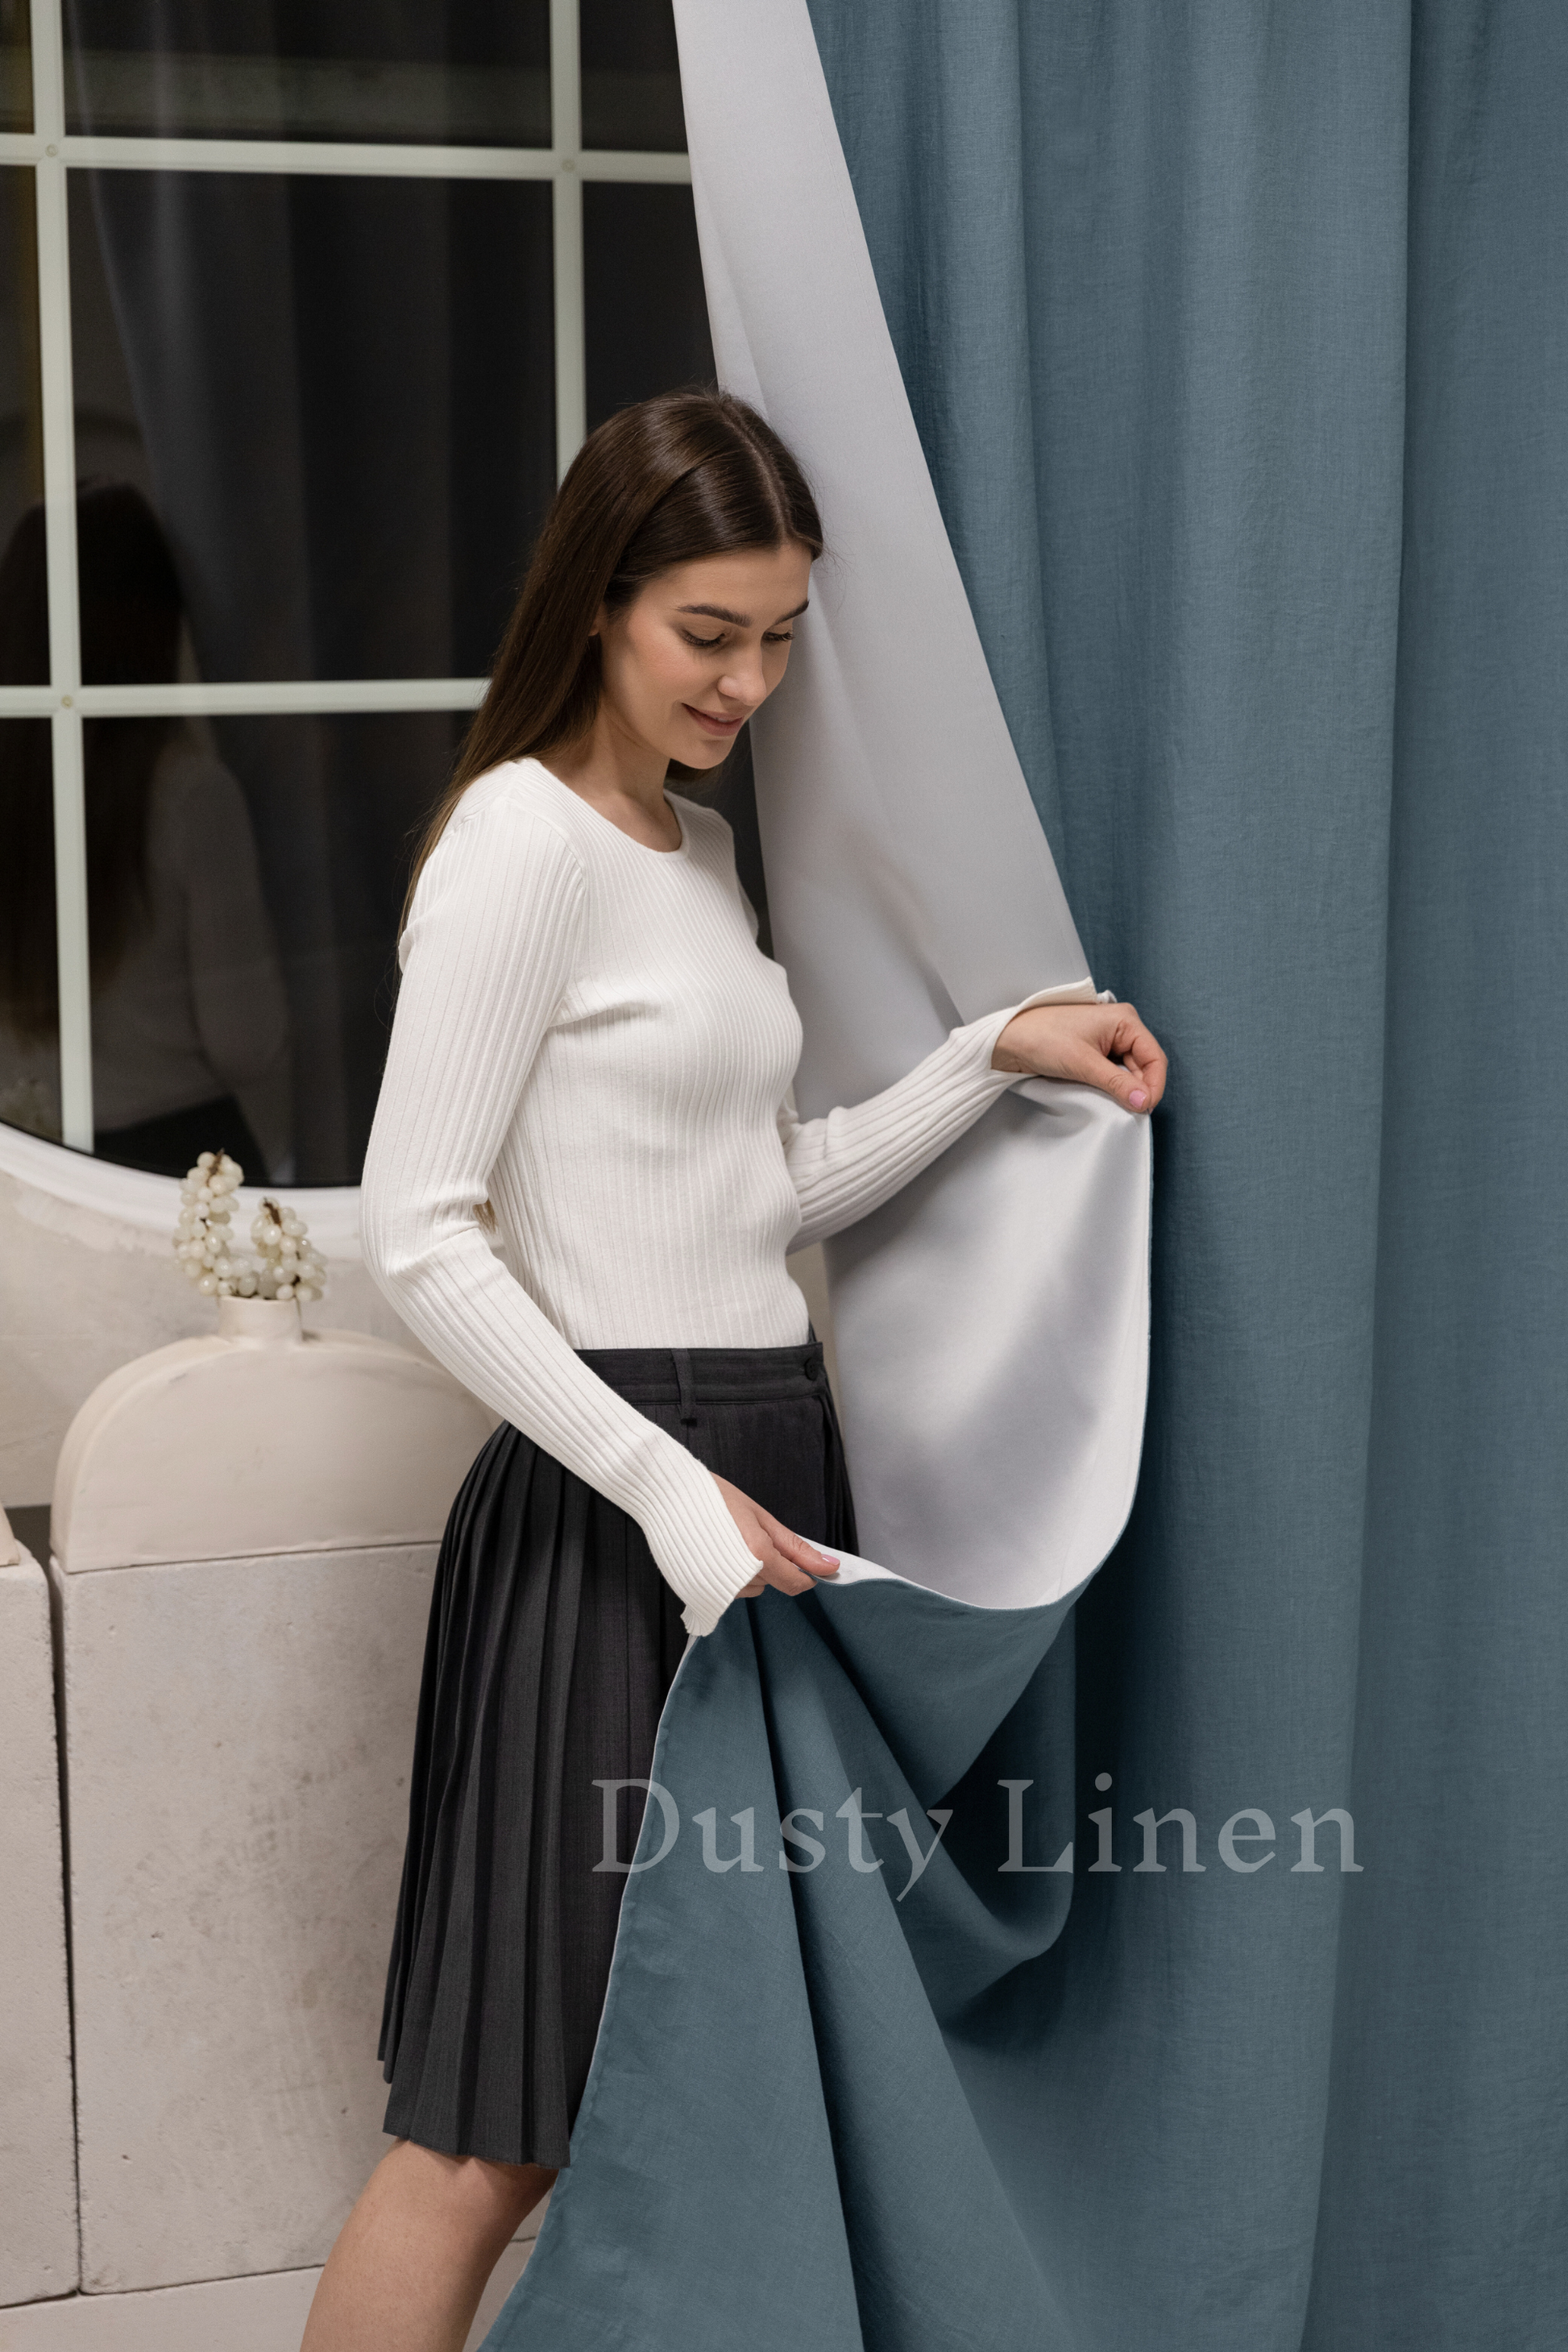 a woman standing next to a curtain in front of a window